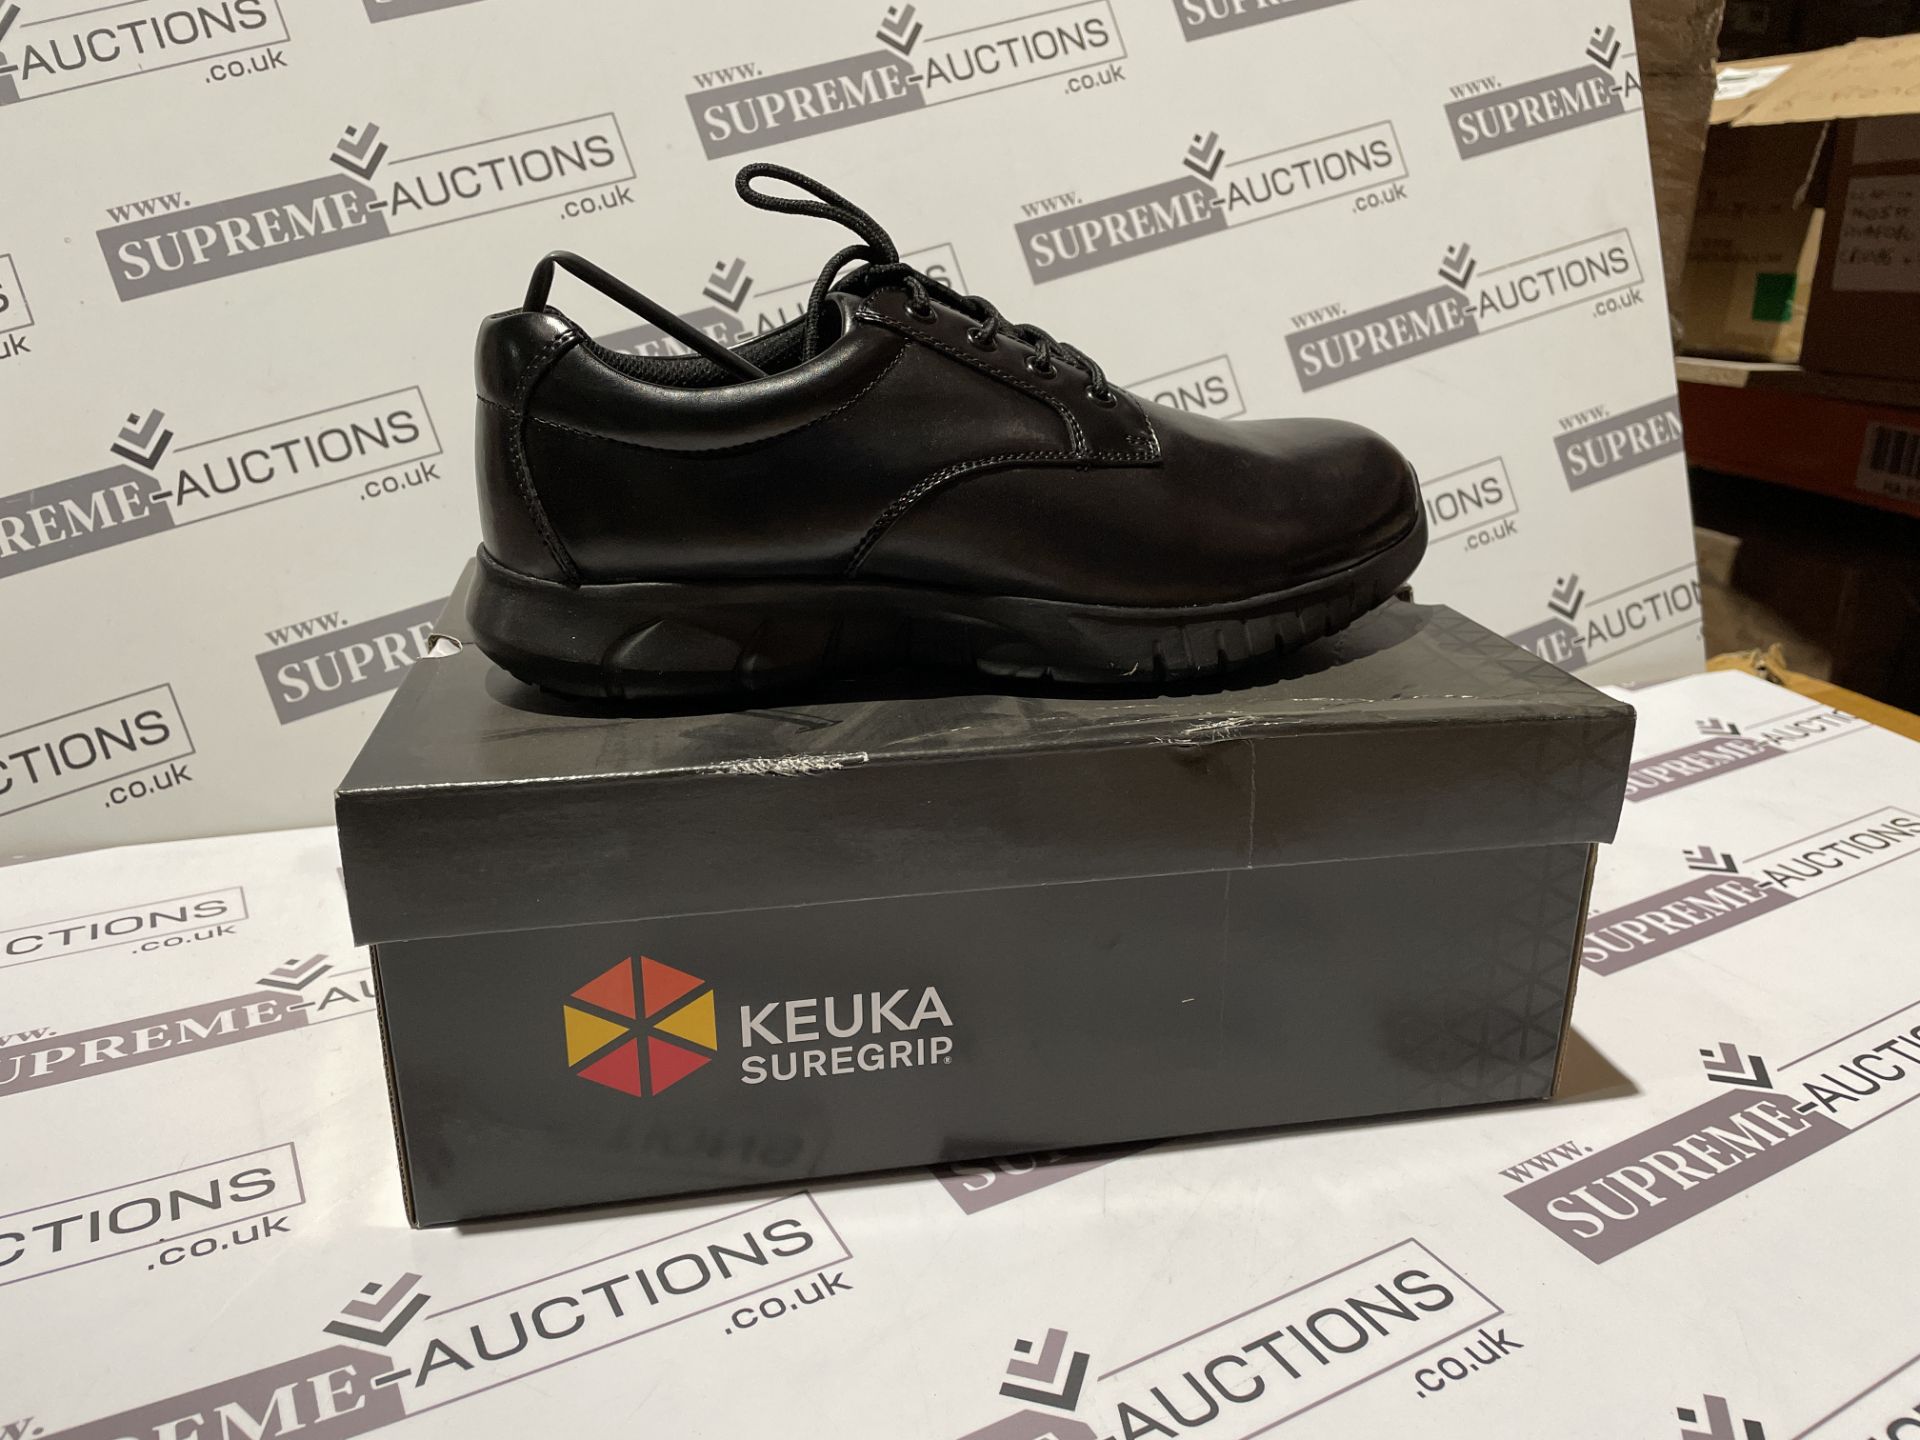 6 X BRAND NEW KEUKA SUREGRIP PROFESSIONAL WORK BOOTS IN VARIOUS SIZES R7-1